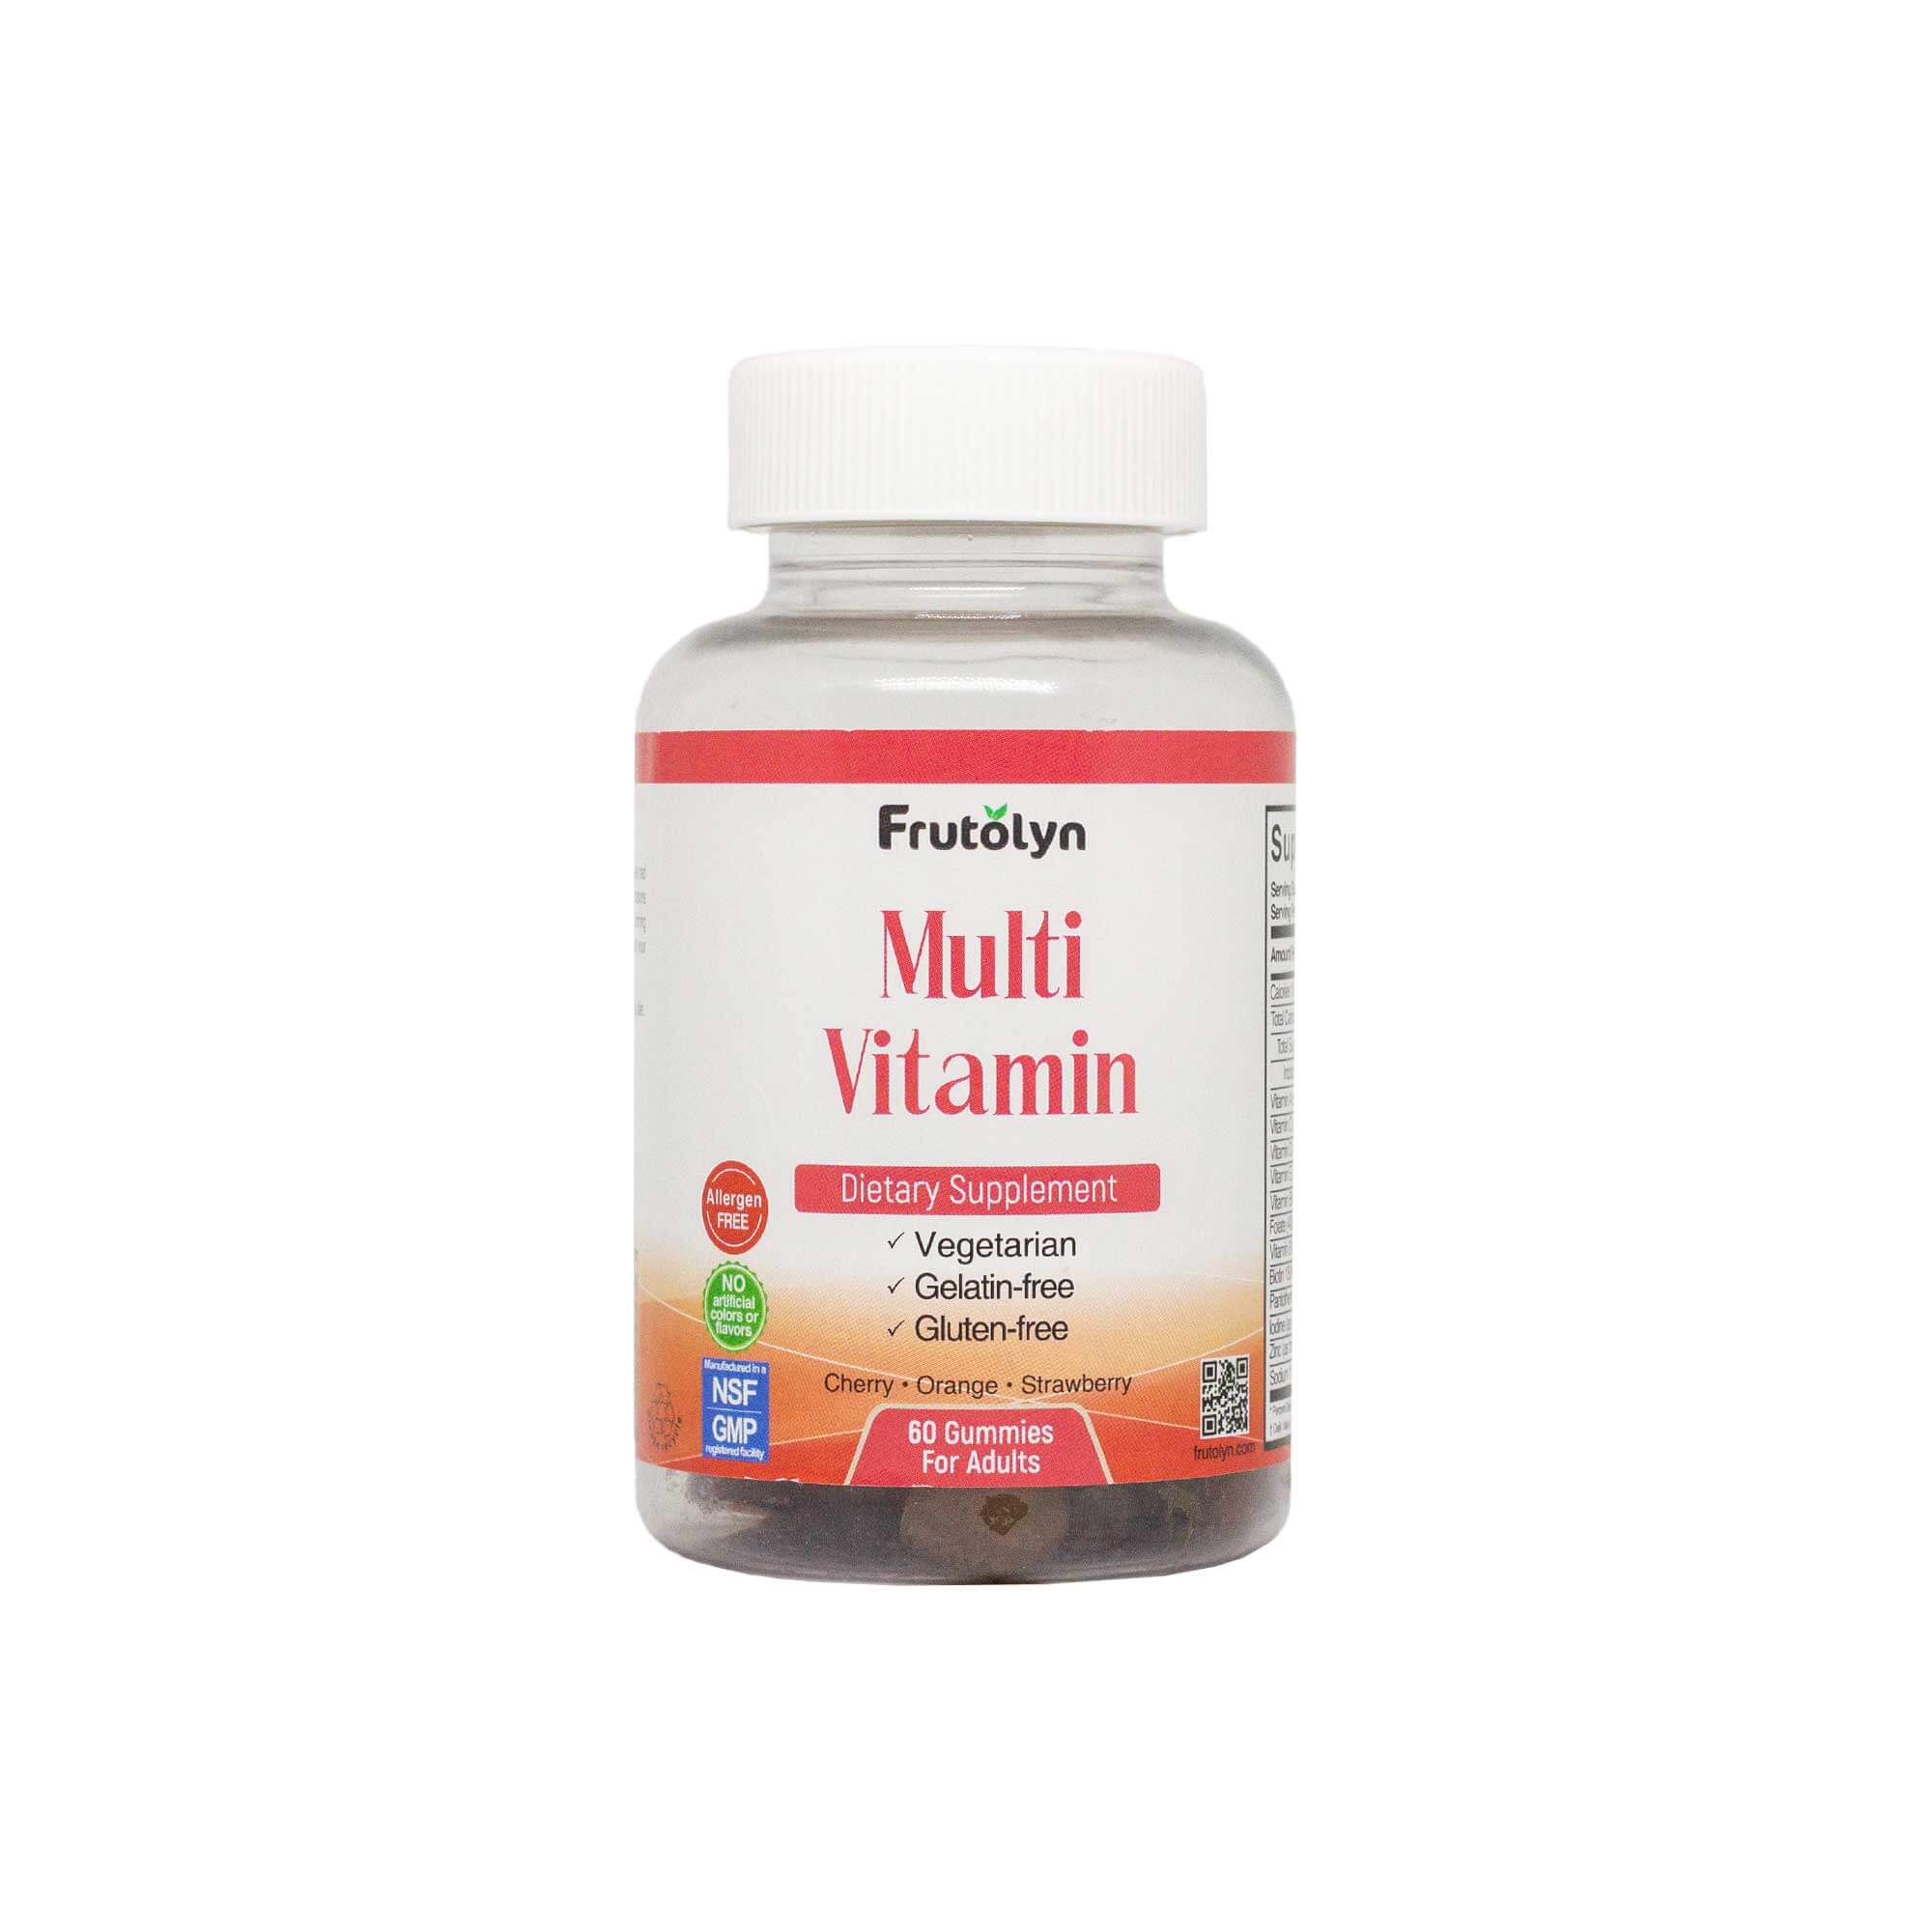 Frutolyn Multivitamins gummy bottle (products page)